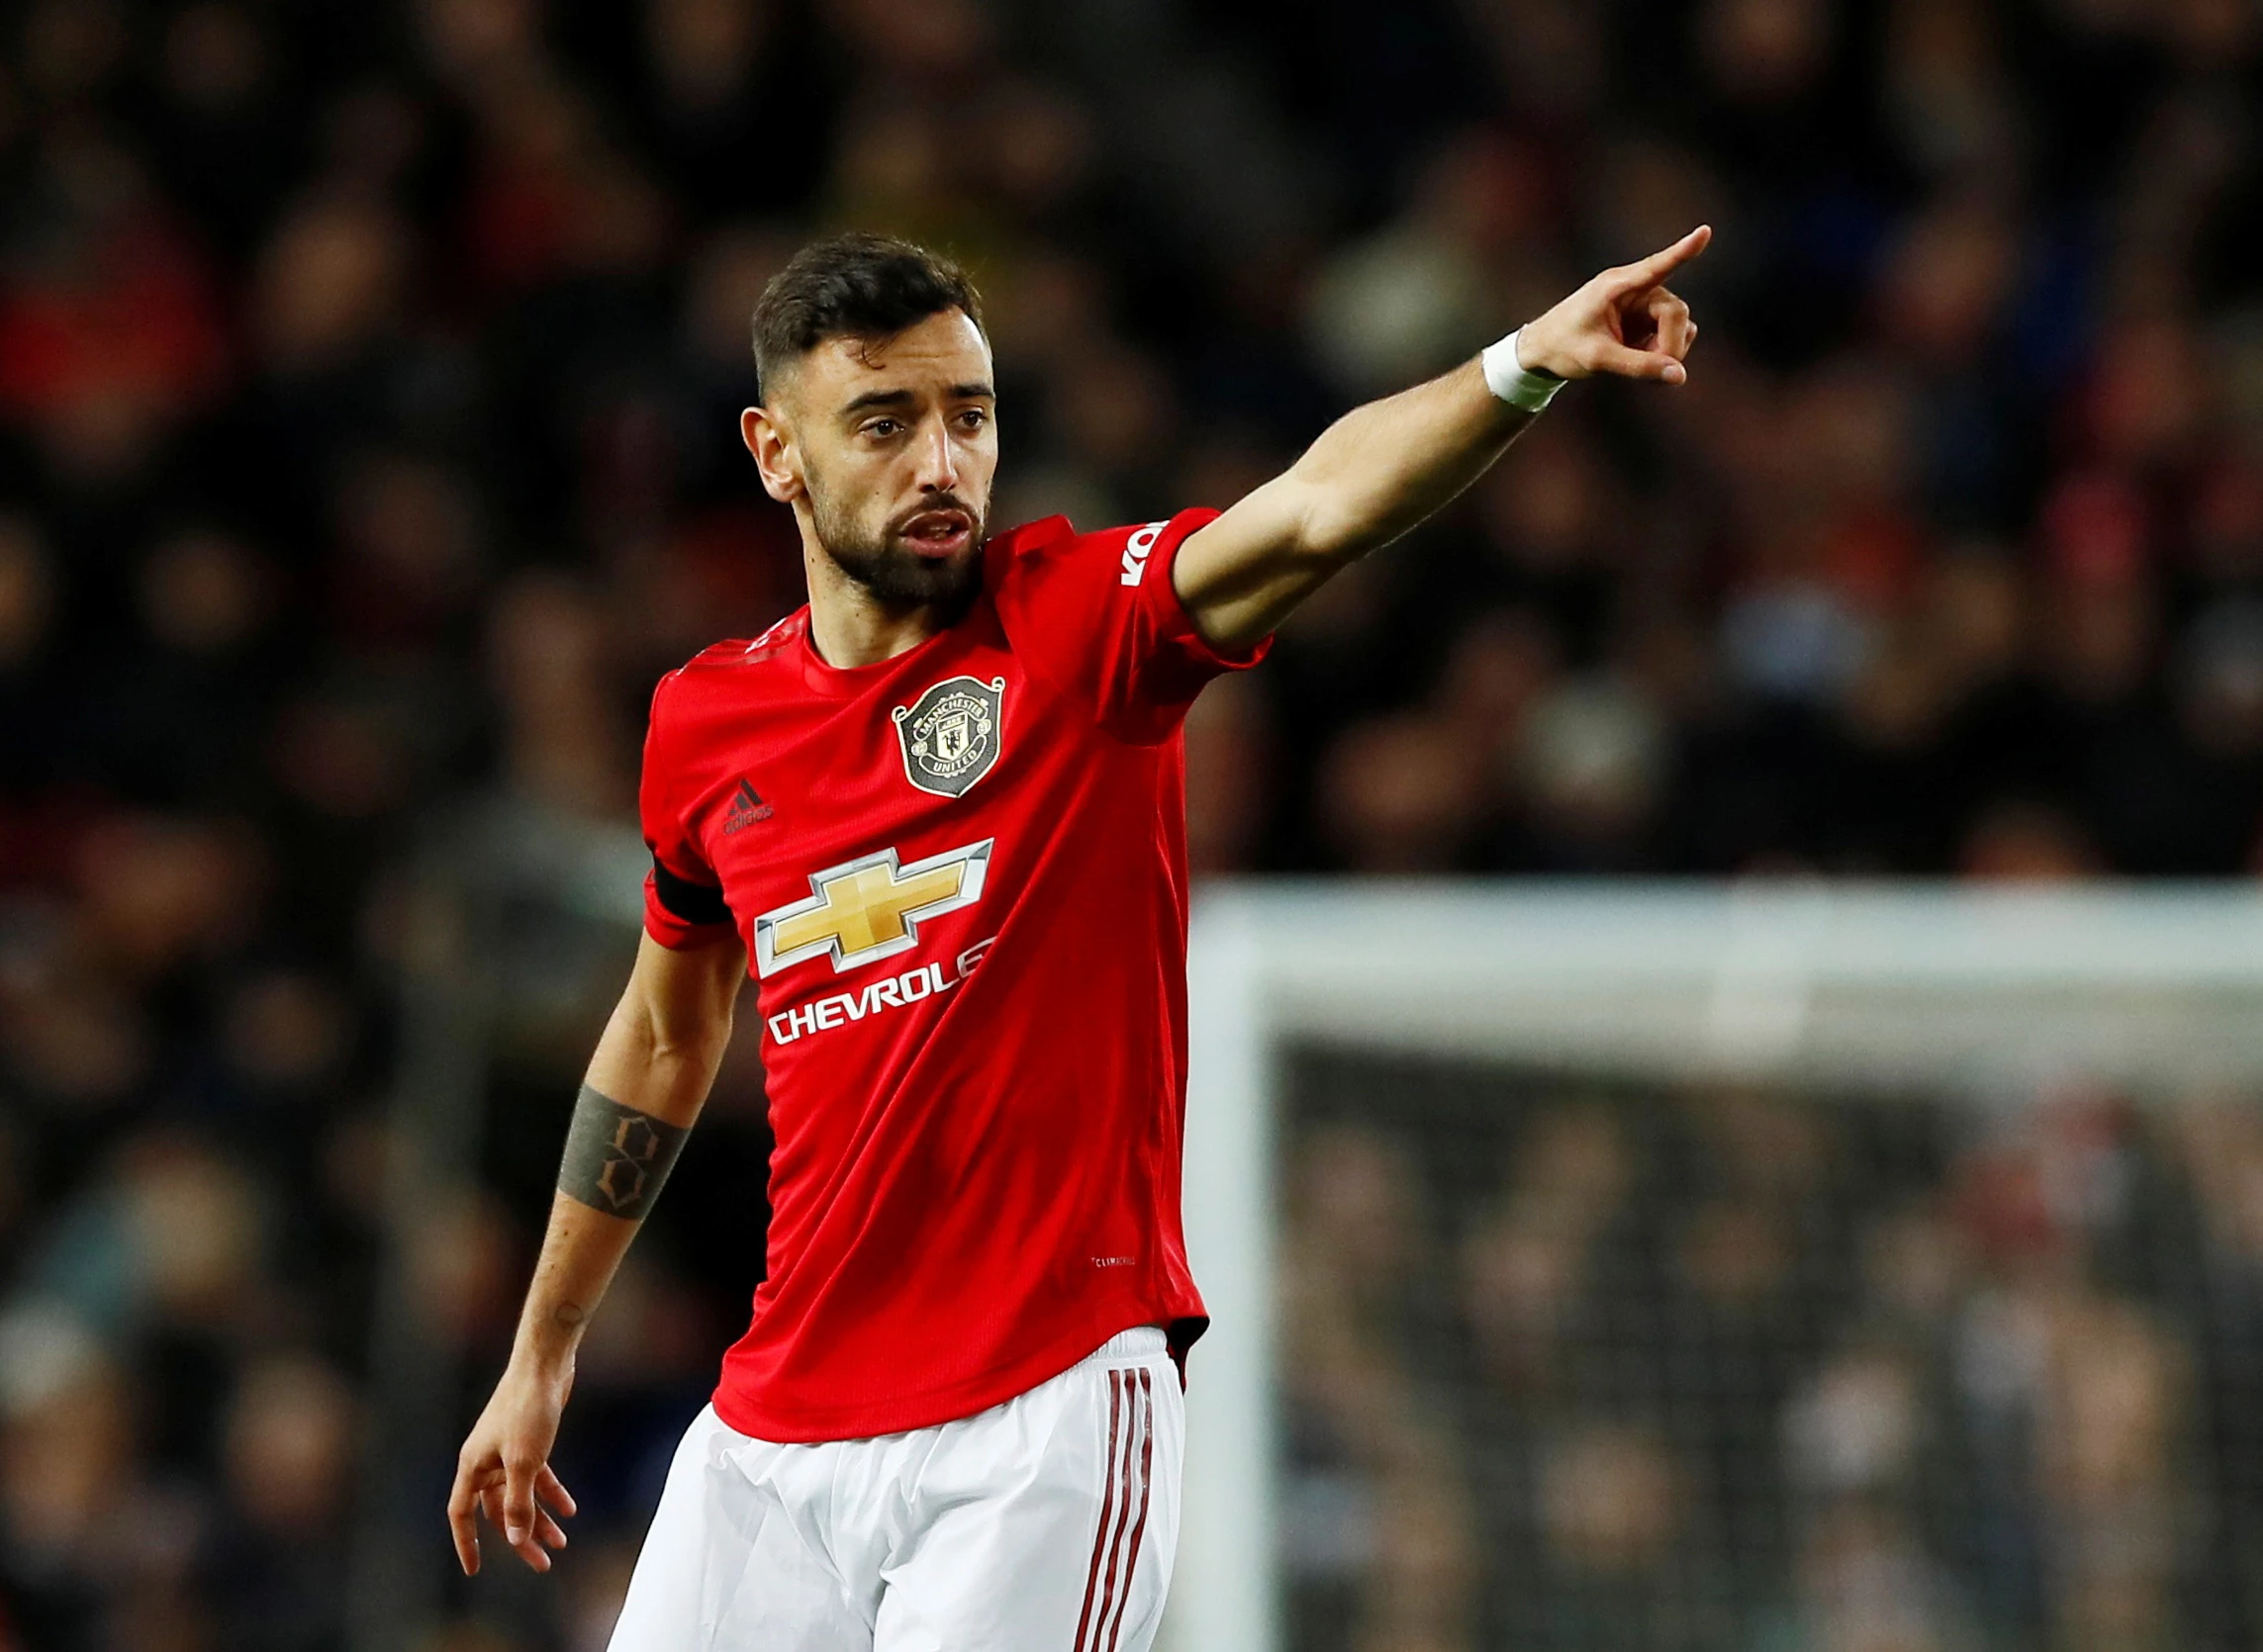 Fernandes has potential to both improve and star in Man United attack